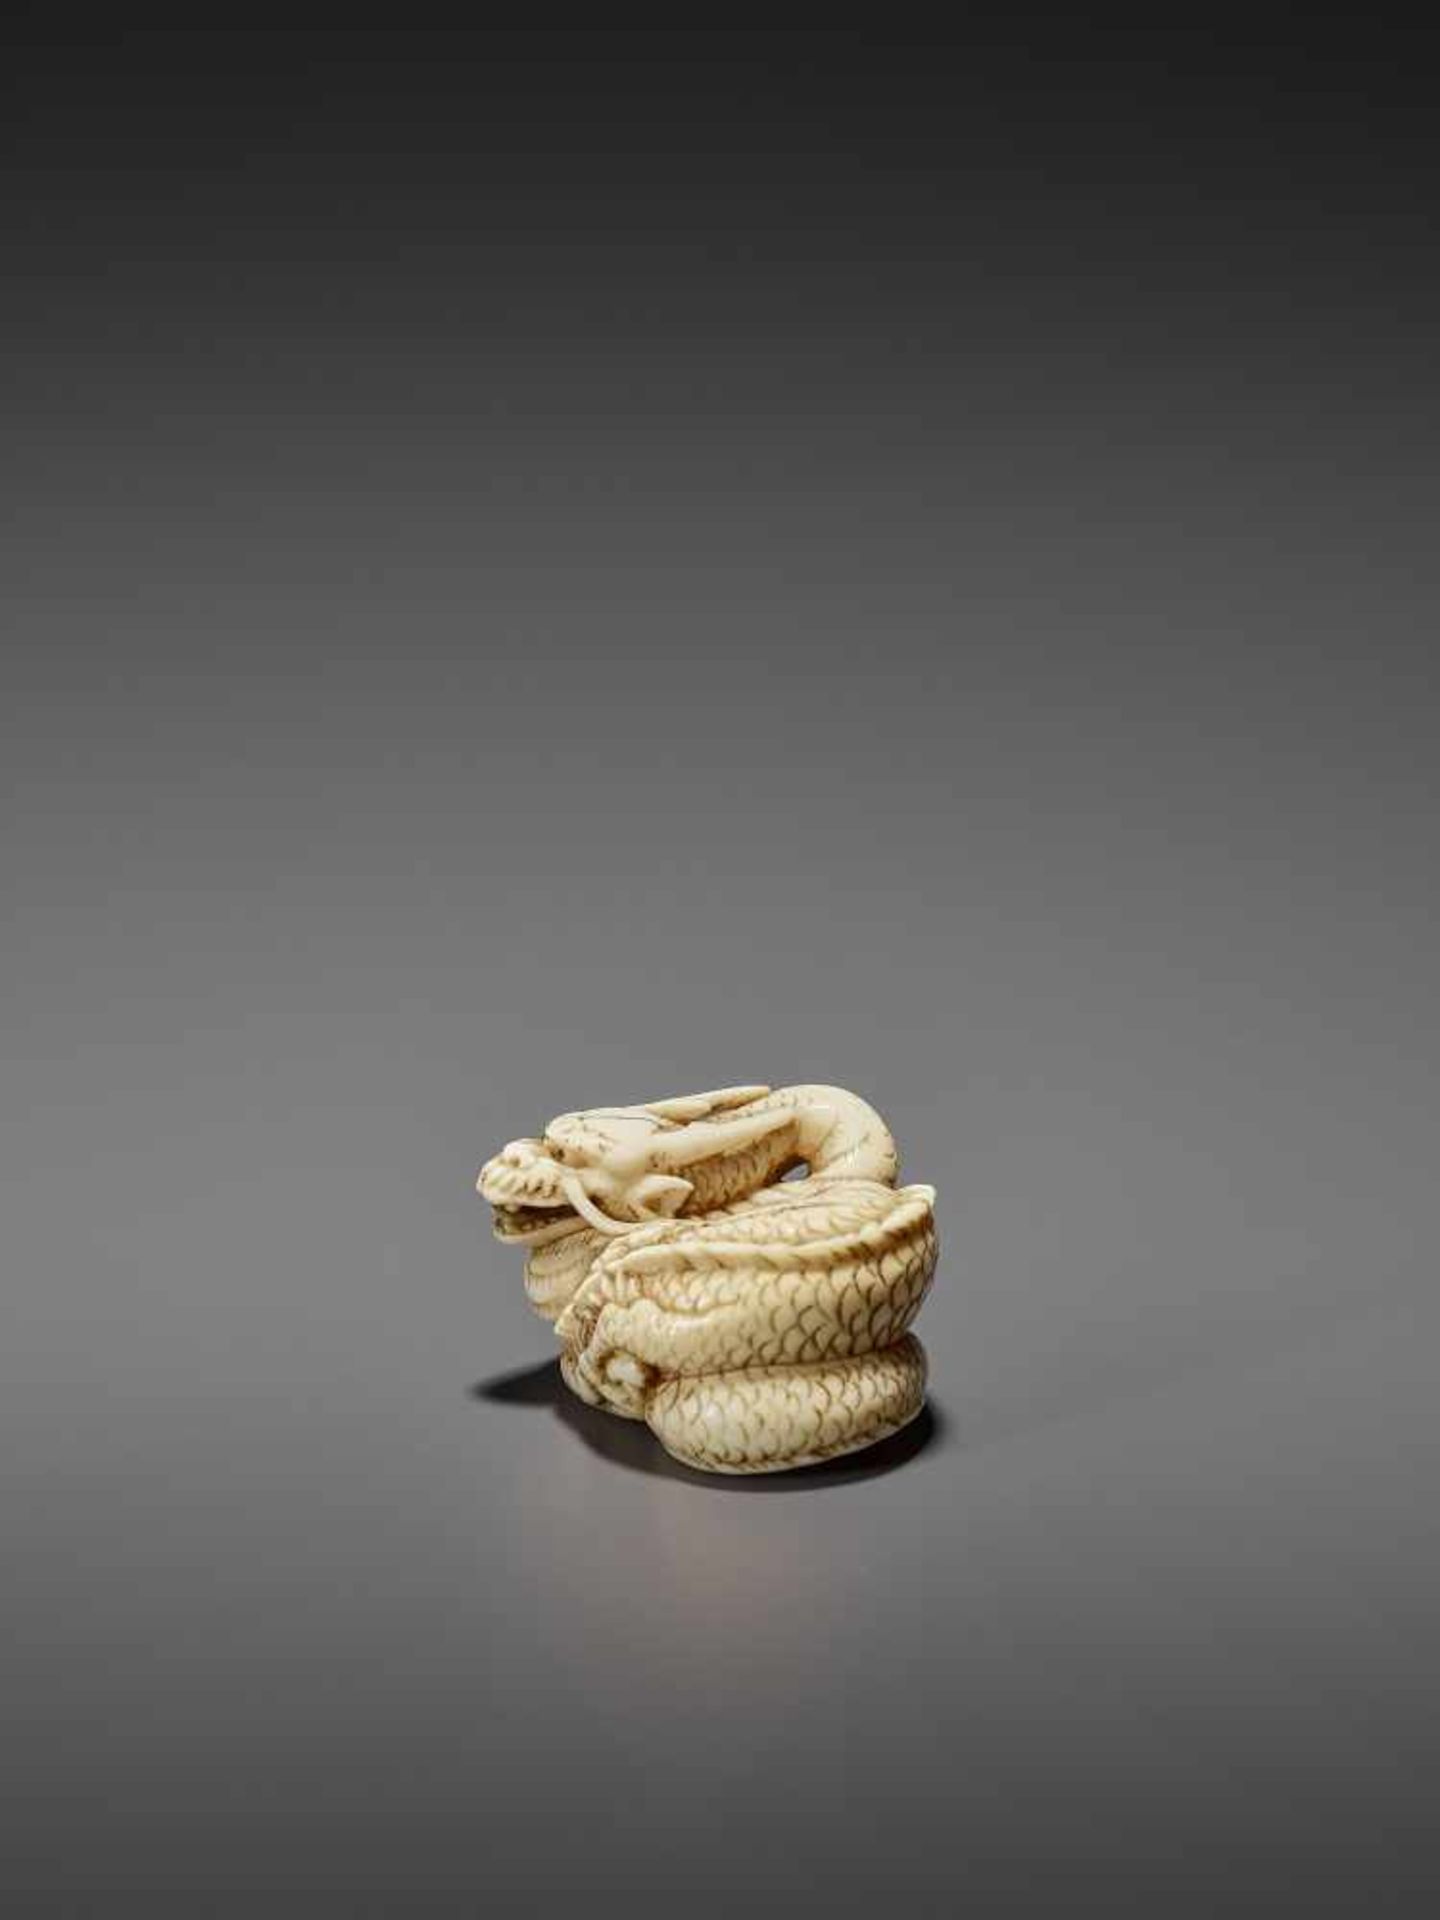 A GOOD IVORY NETSUKE OF A COILED DRAGON UnsignedJapan, Kyoto, late 18th to early 19th century, Edo - Image 5 of 10